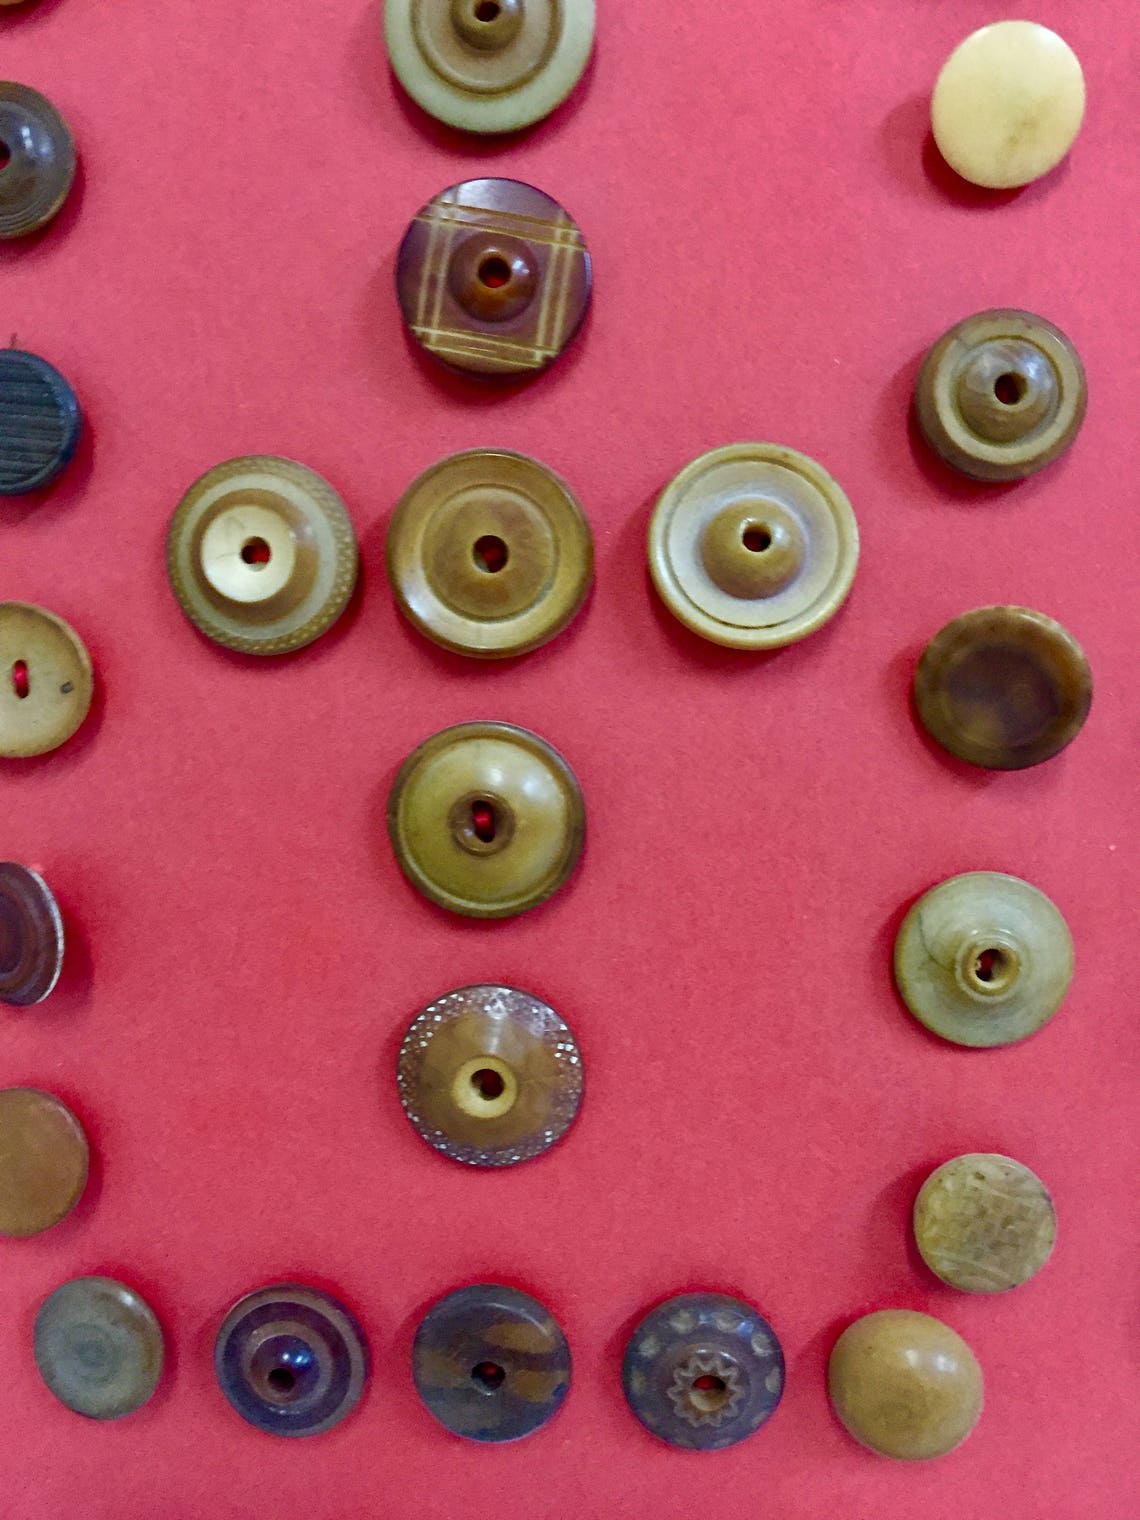 Vintage Button Collection/antique Buttons on Button - Etsy